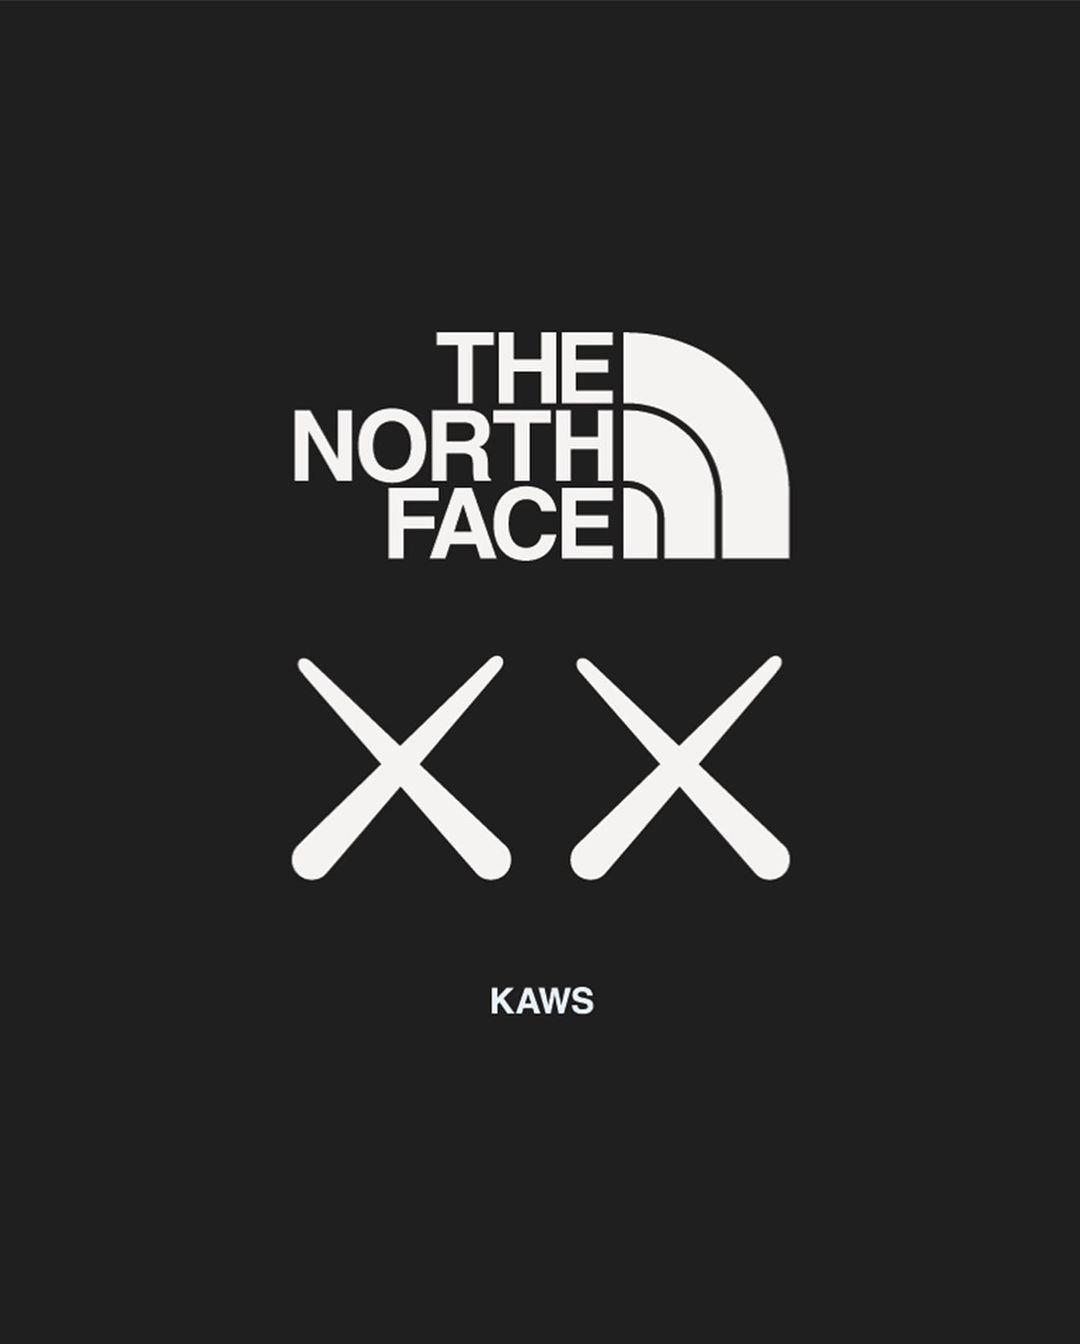 KAWS x The North Face collab 2022